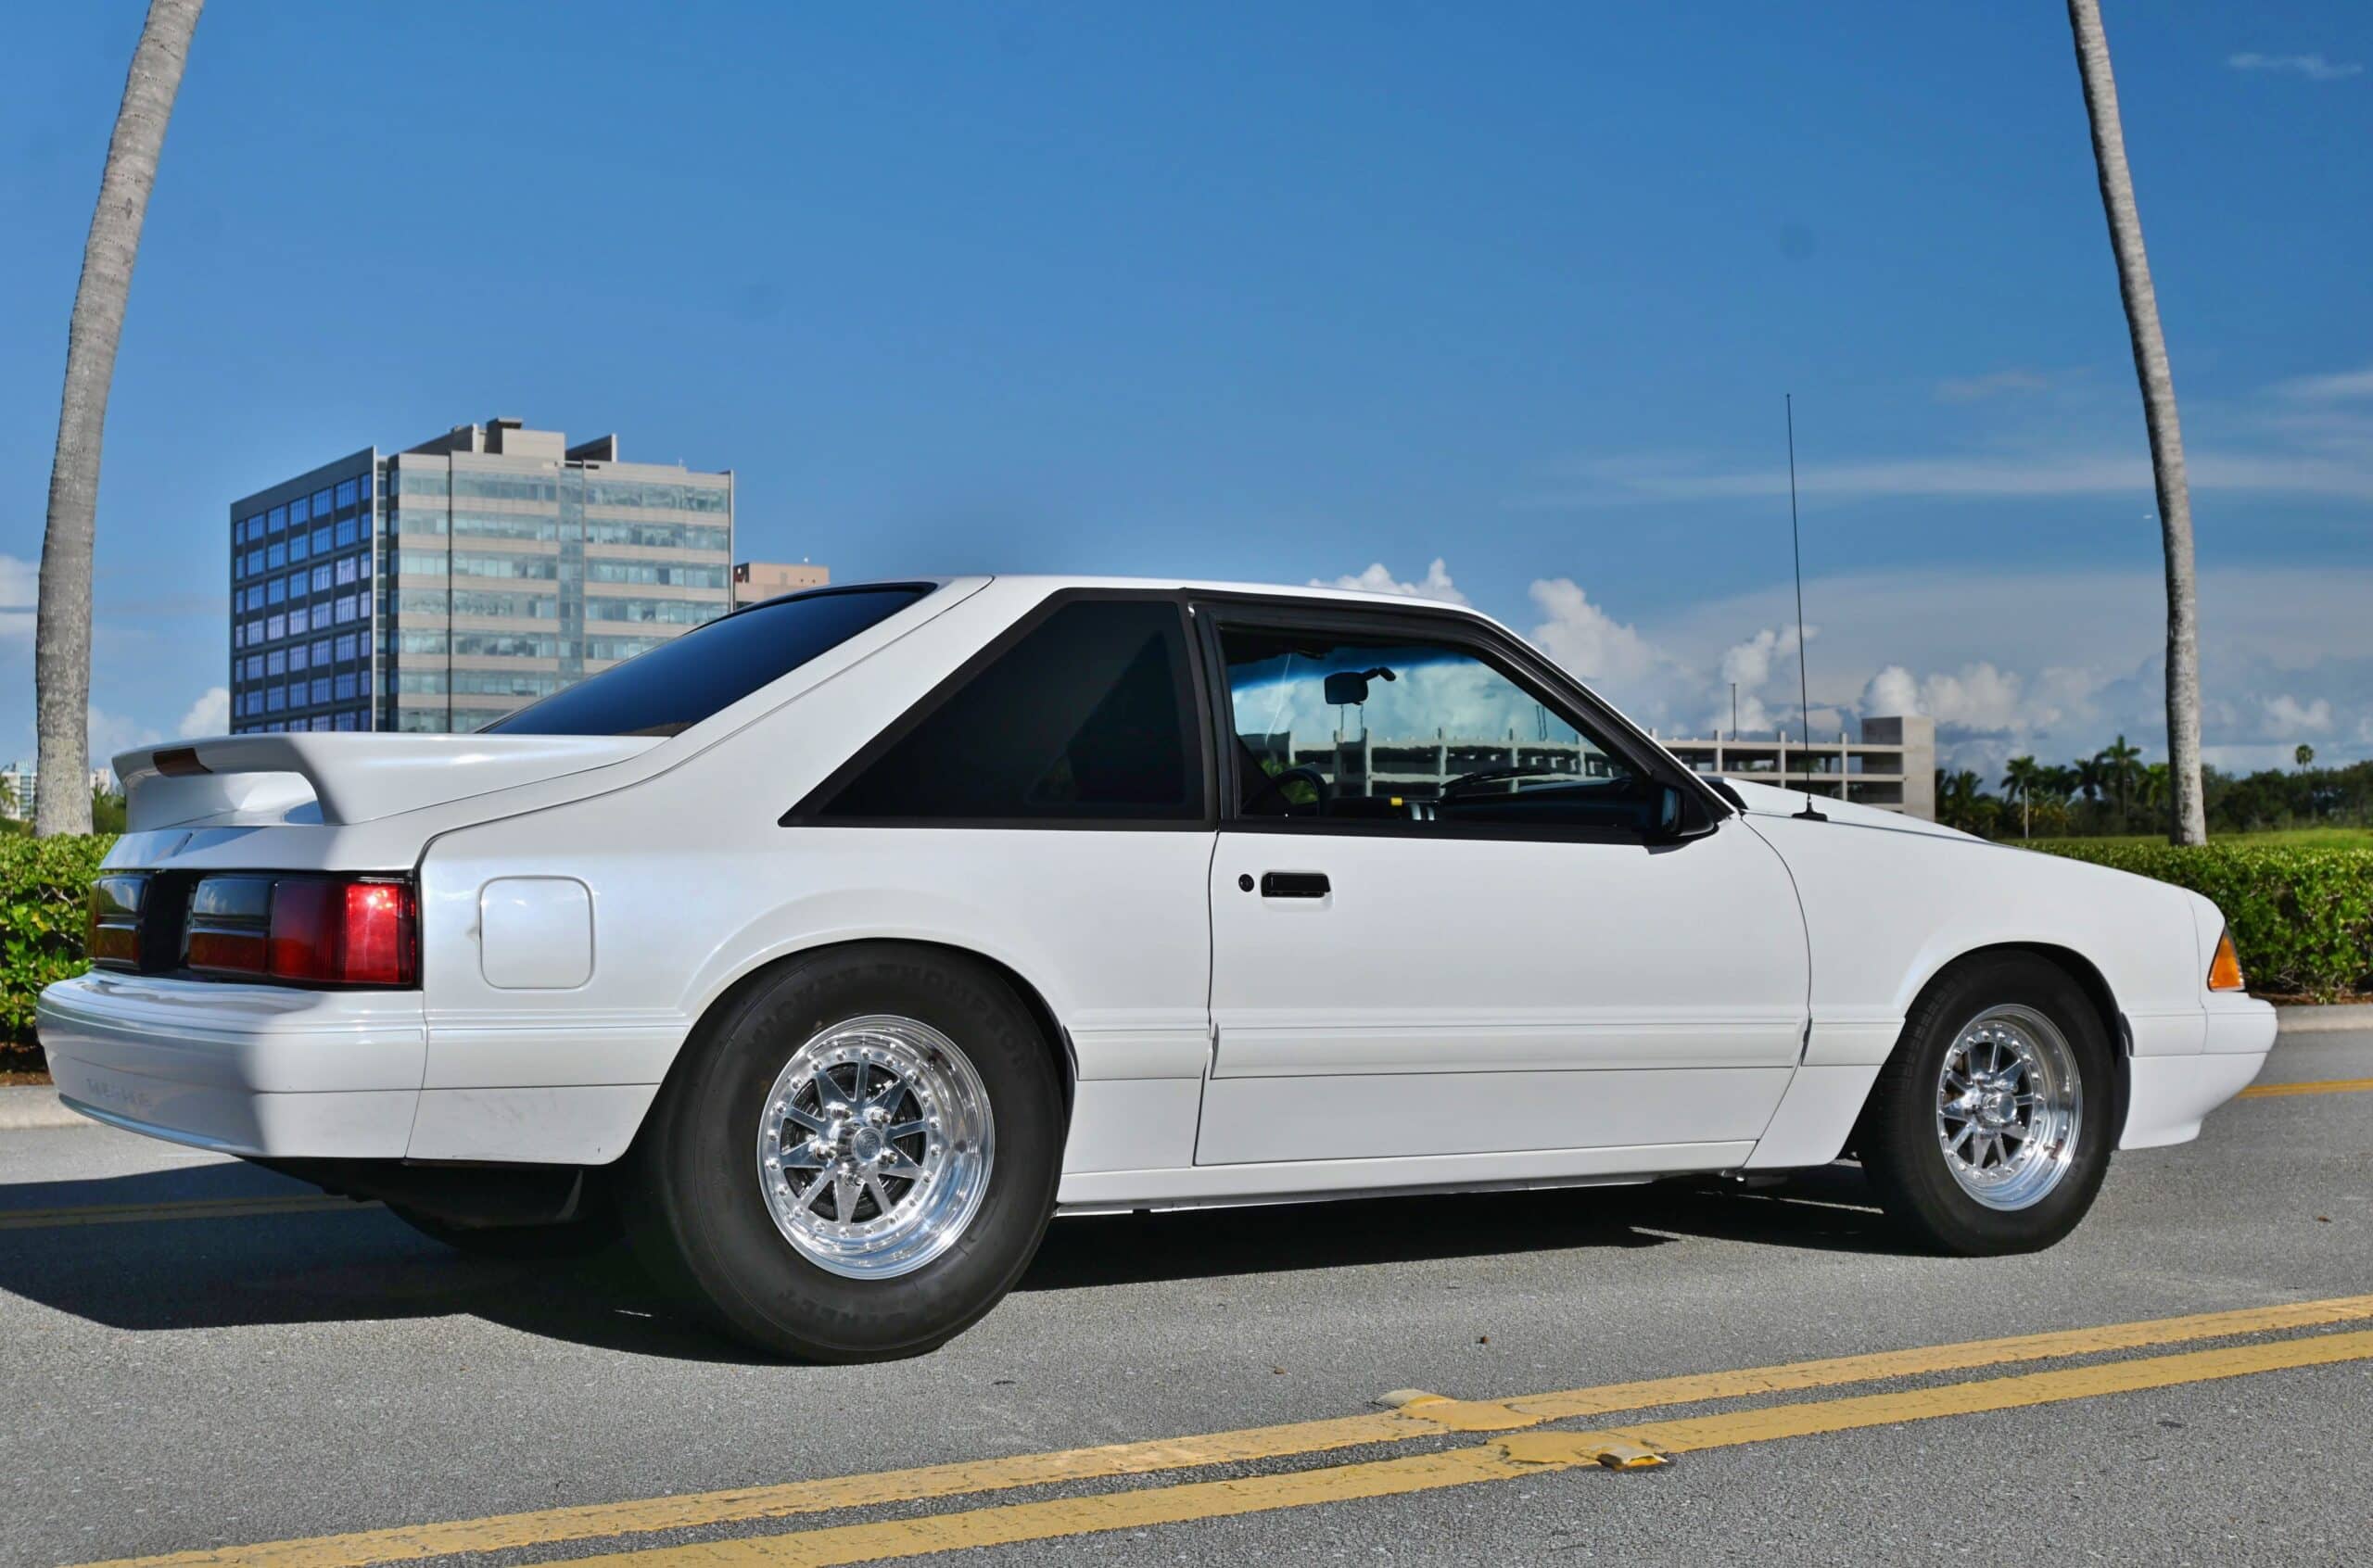 1991 Ford Mustang LX 5.0 Street/Strip 361 CI V8 Dart Block – 500HP – T5 Clutch less trans – COLD AC Over $50,000 invested